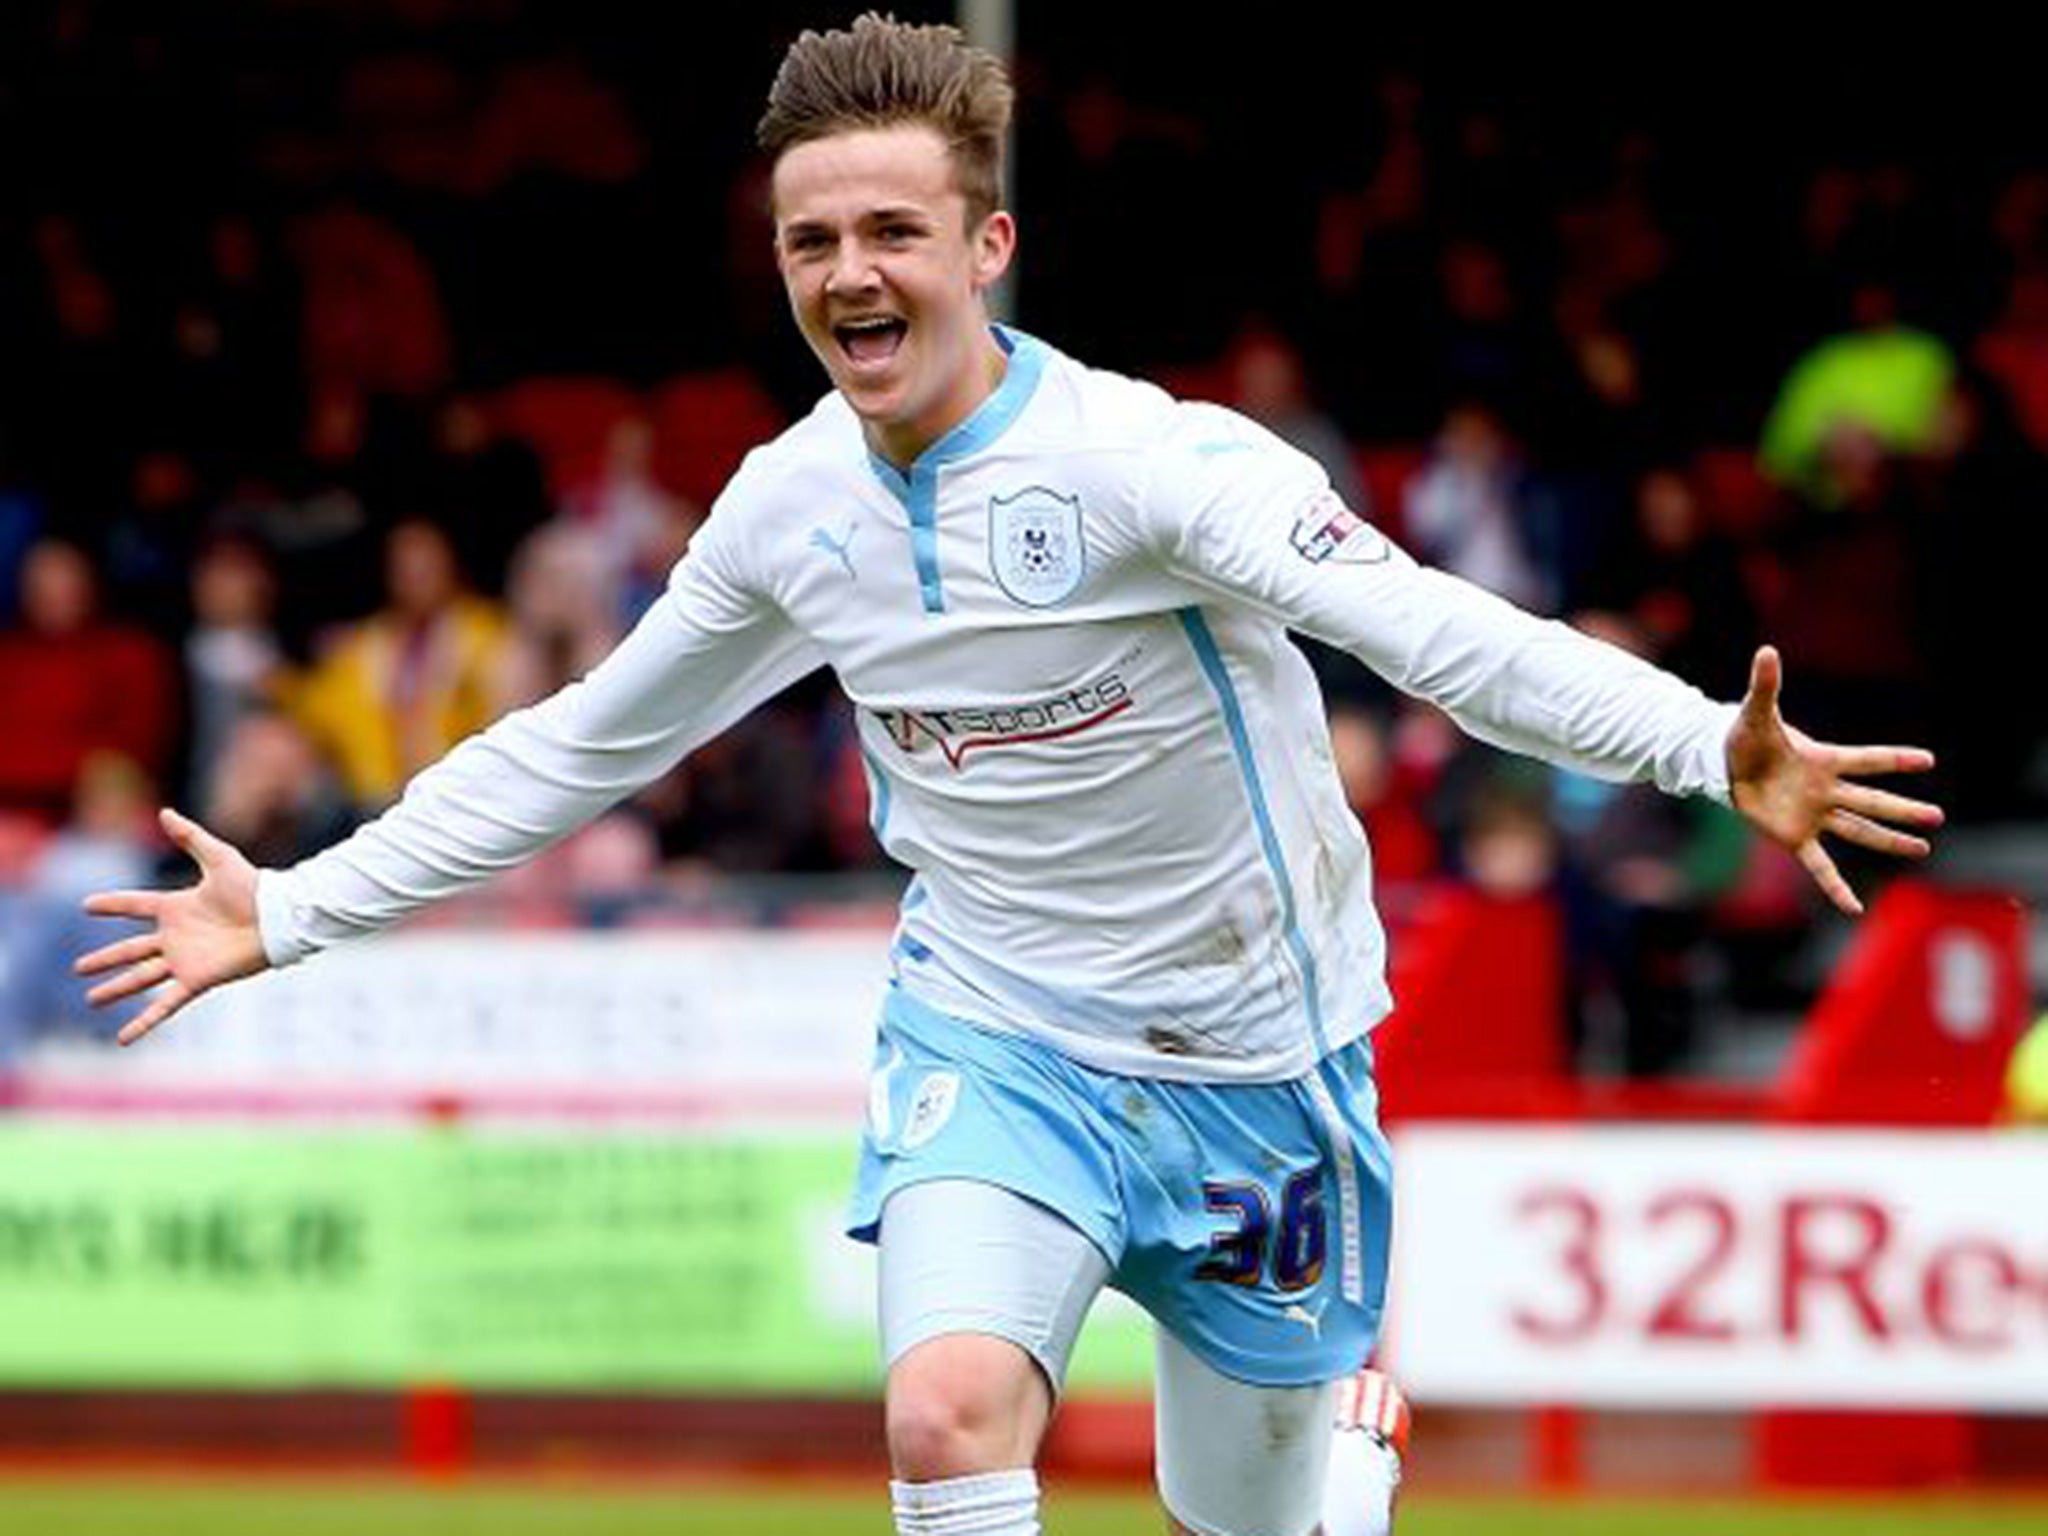 James Maddison, Coventry City’s young attacking midfielder, has caught the attention of Premier League clubs